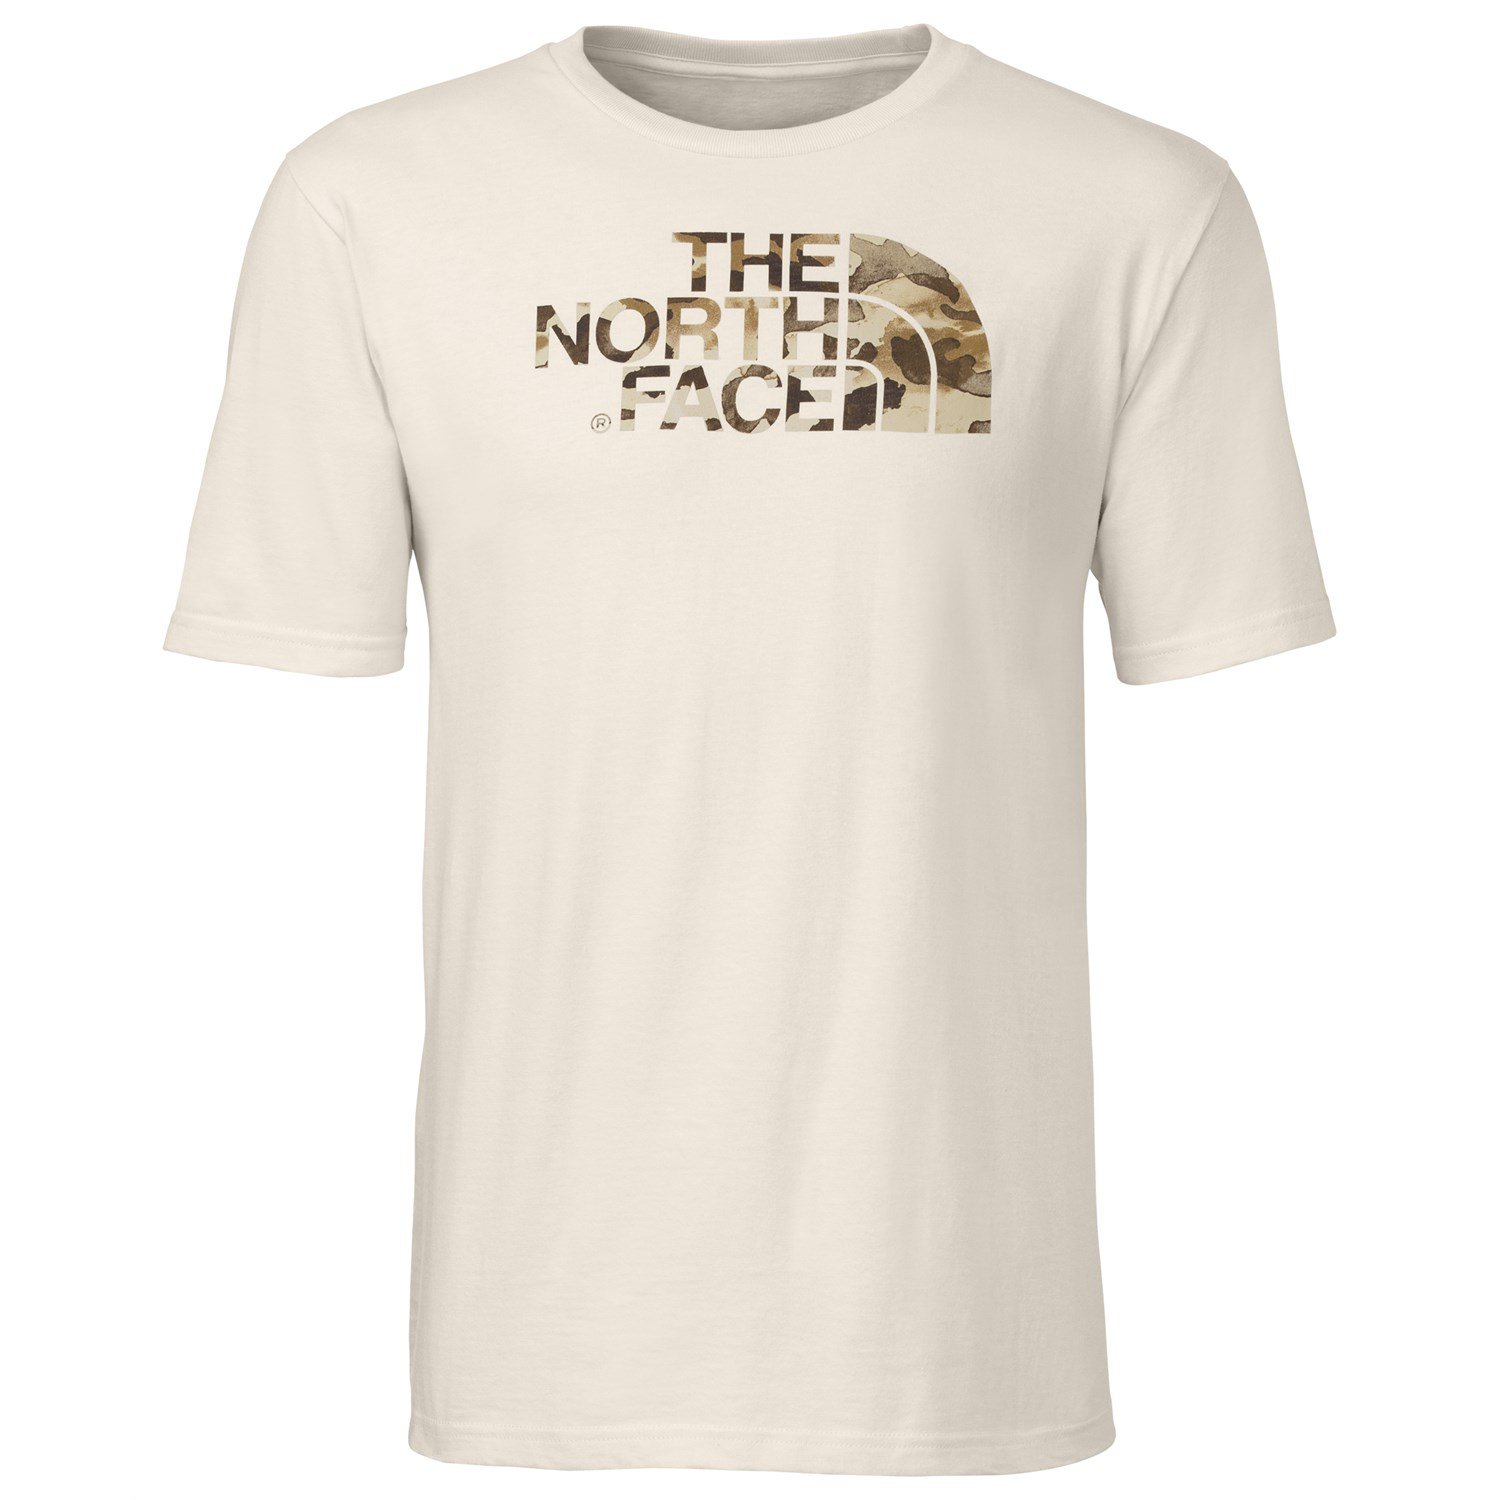 The North Face Never Stop Exploring T-shirt Men Adult M White Camo Graphic